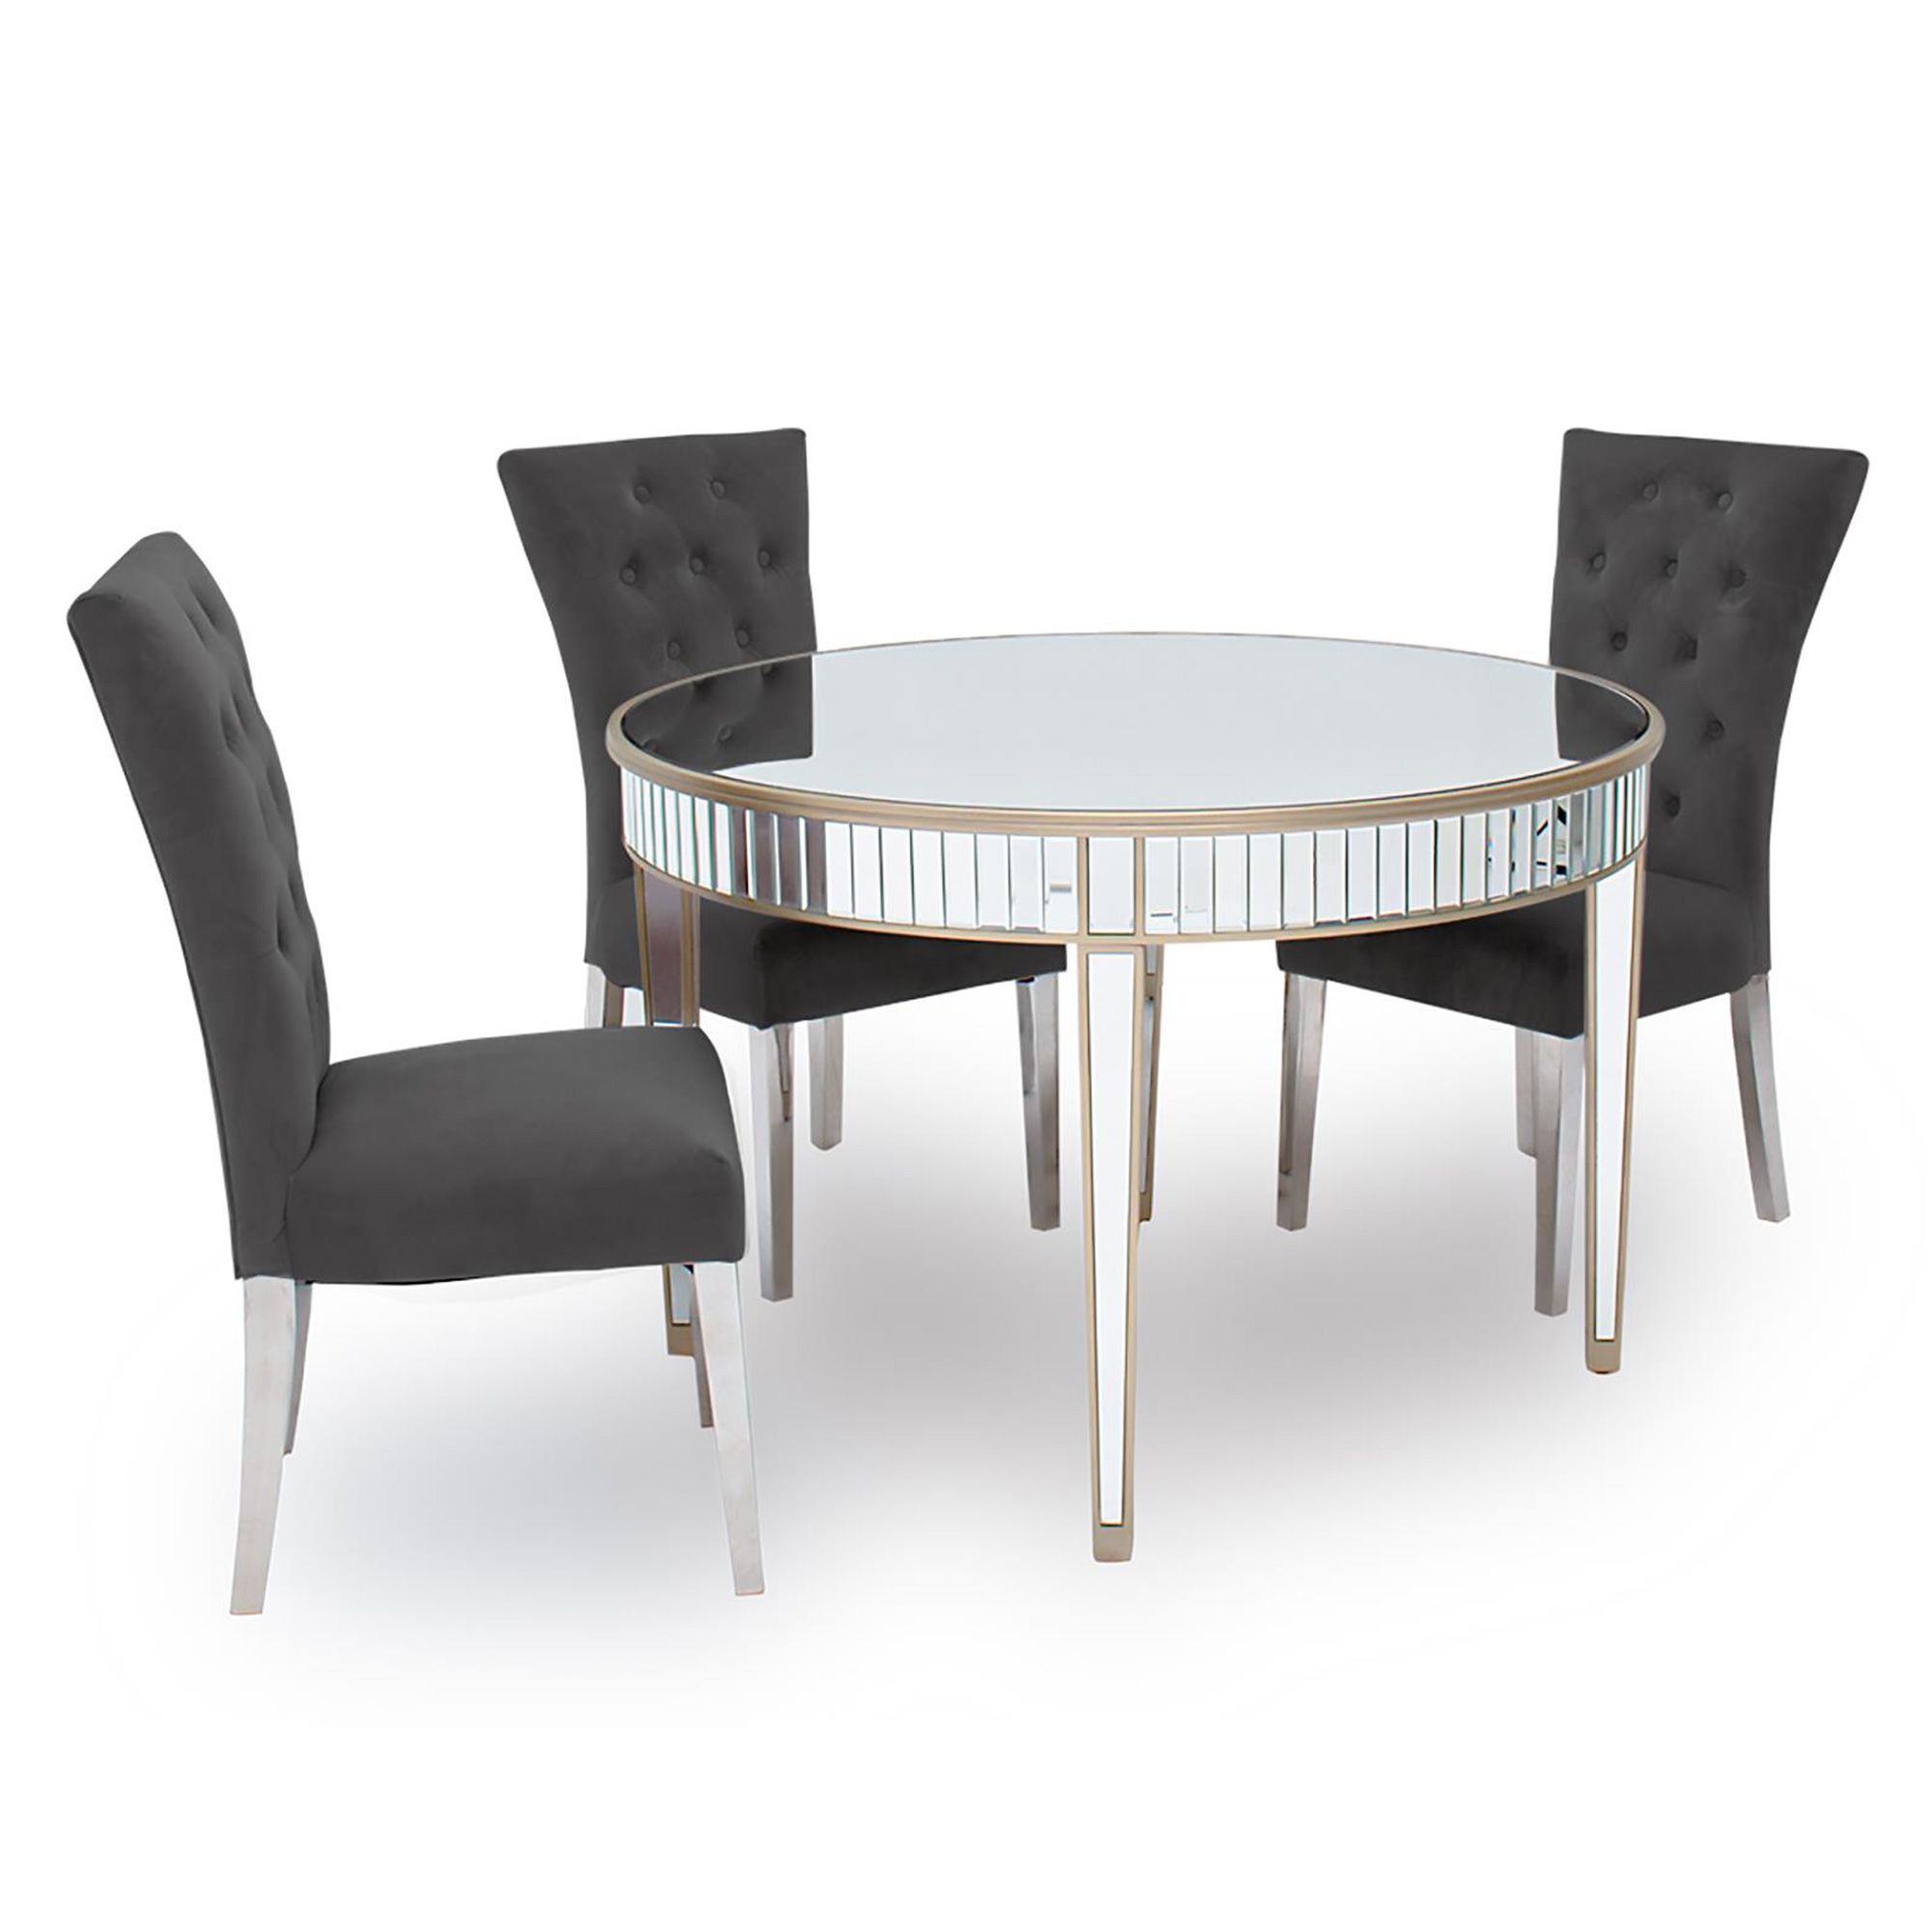 Ashley 4 Person Round Dining Table, Round 4 Person Dining Table And Chairs